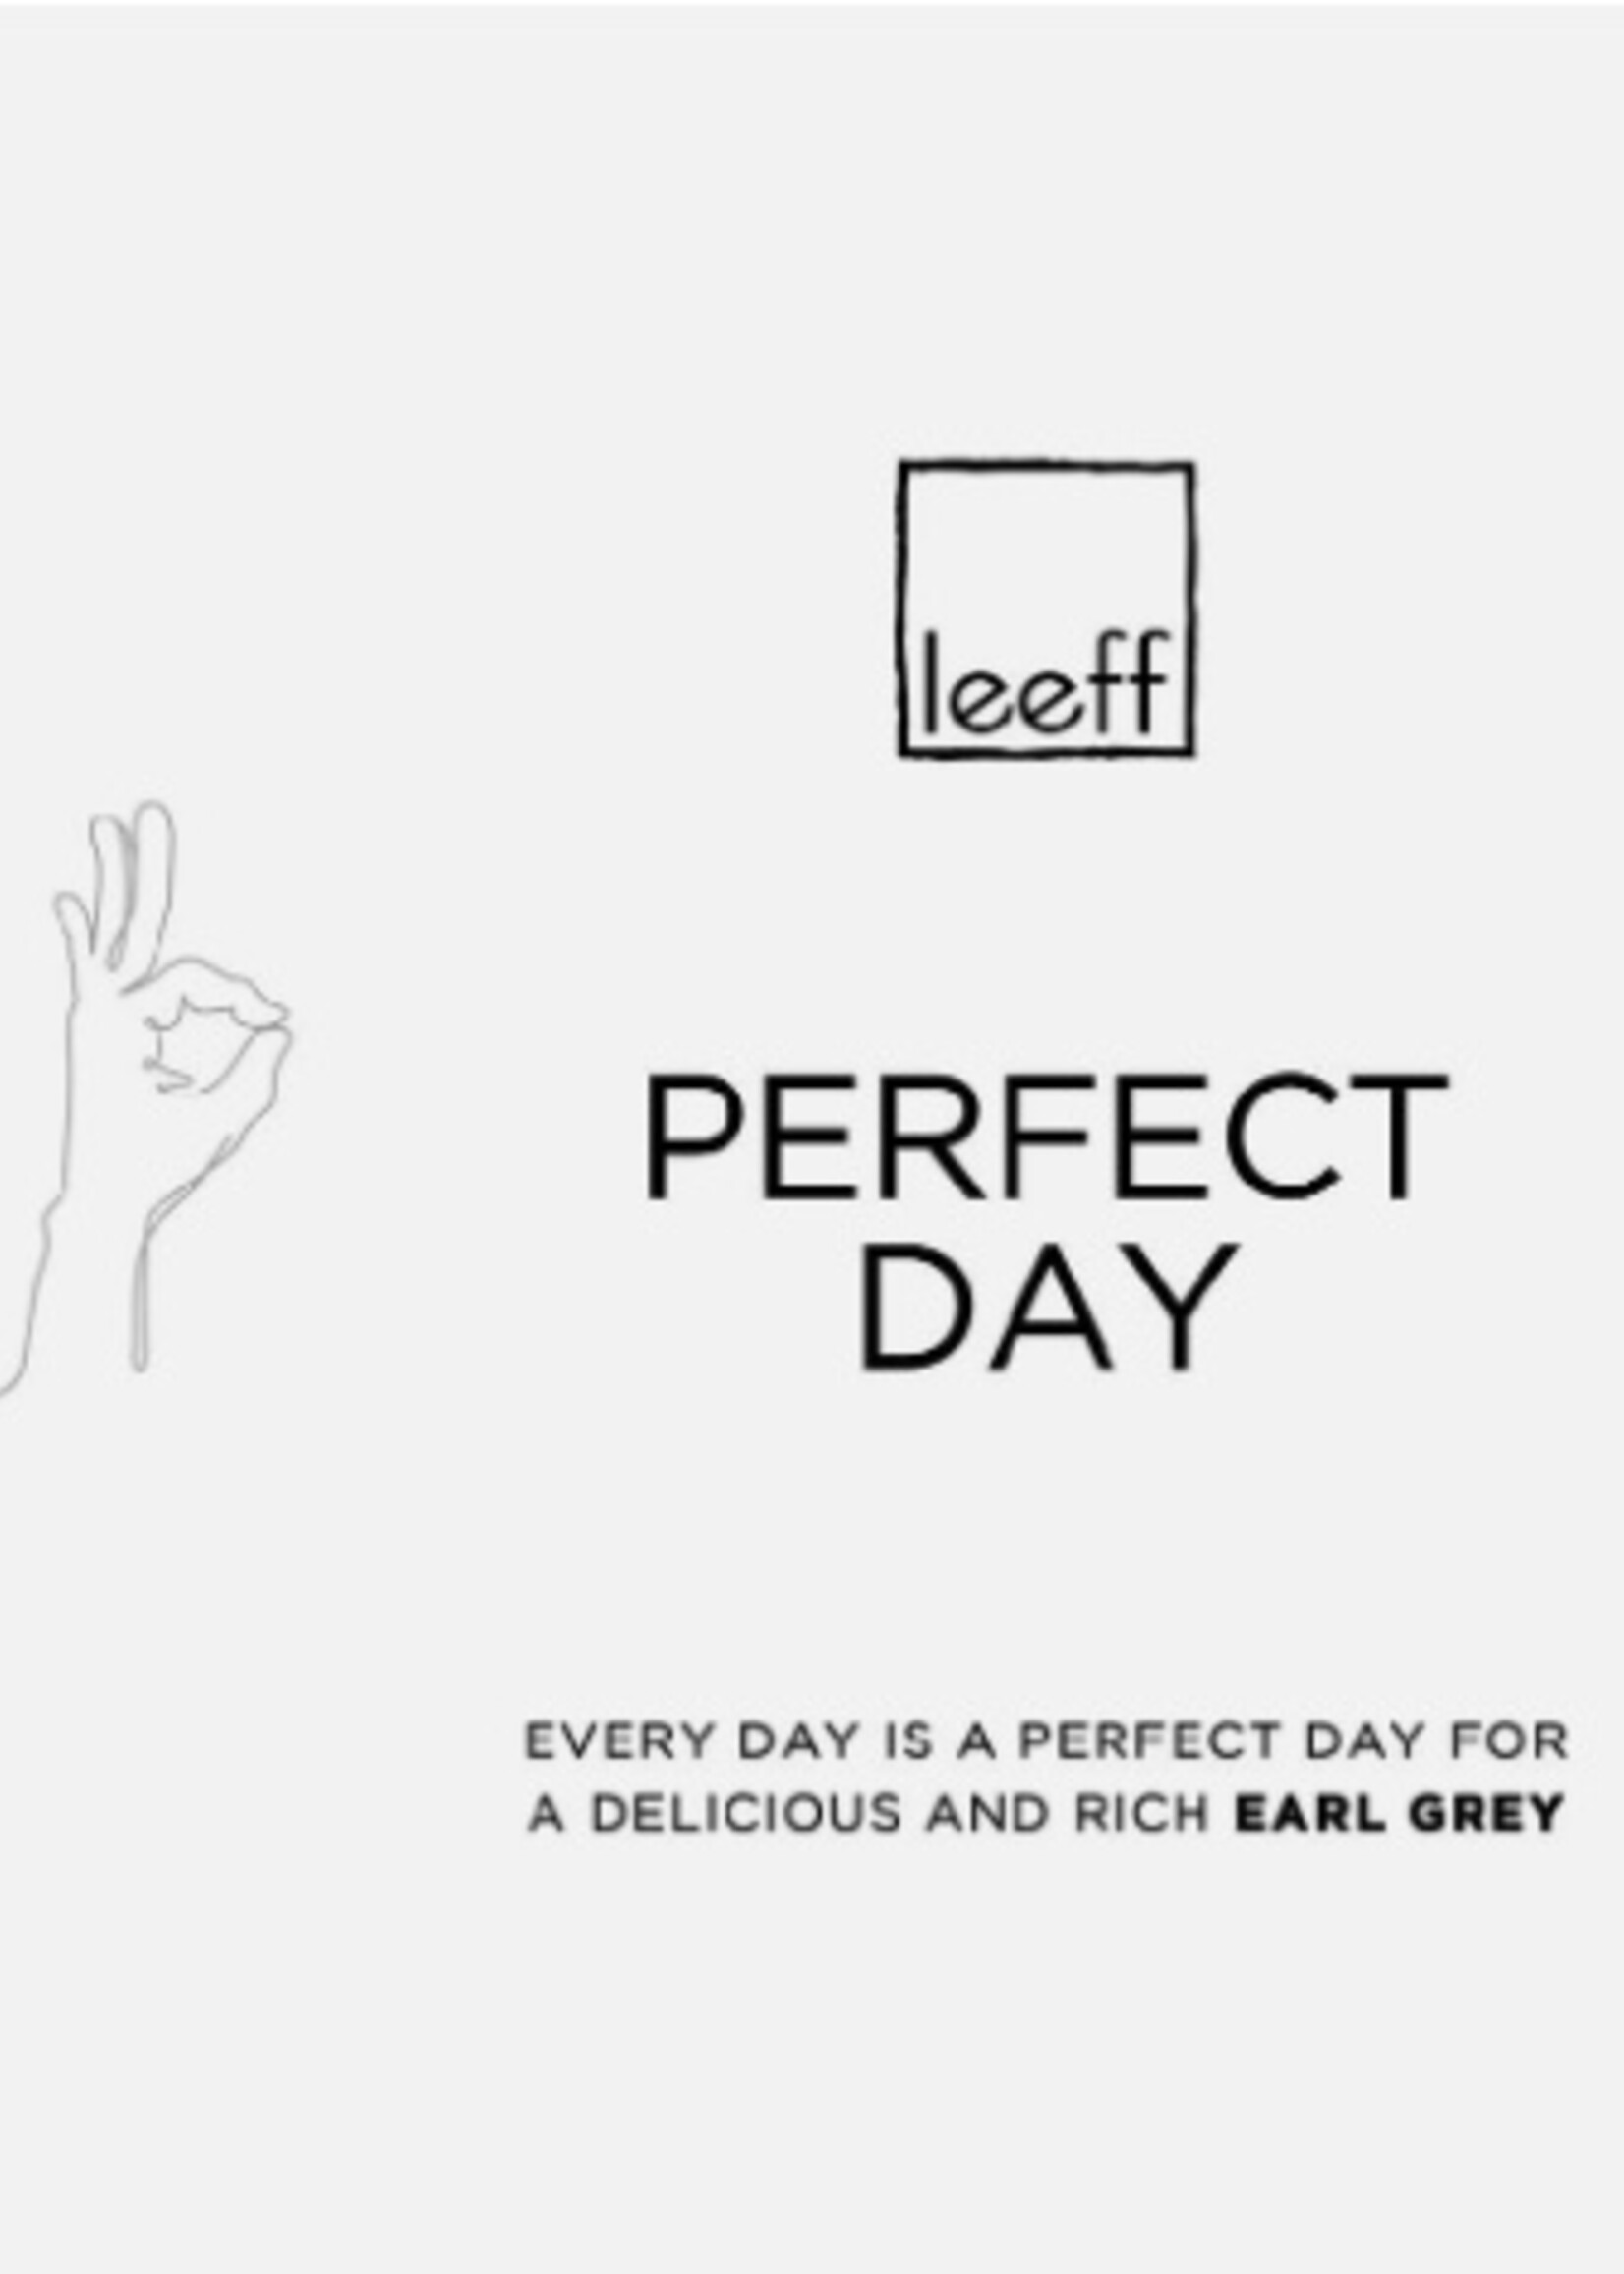 Leeff Thee - perfect day